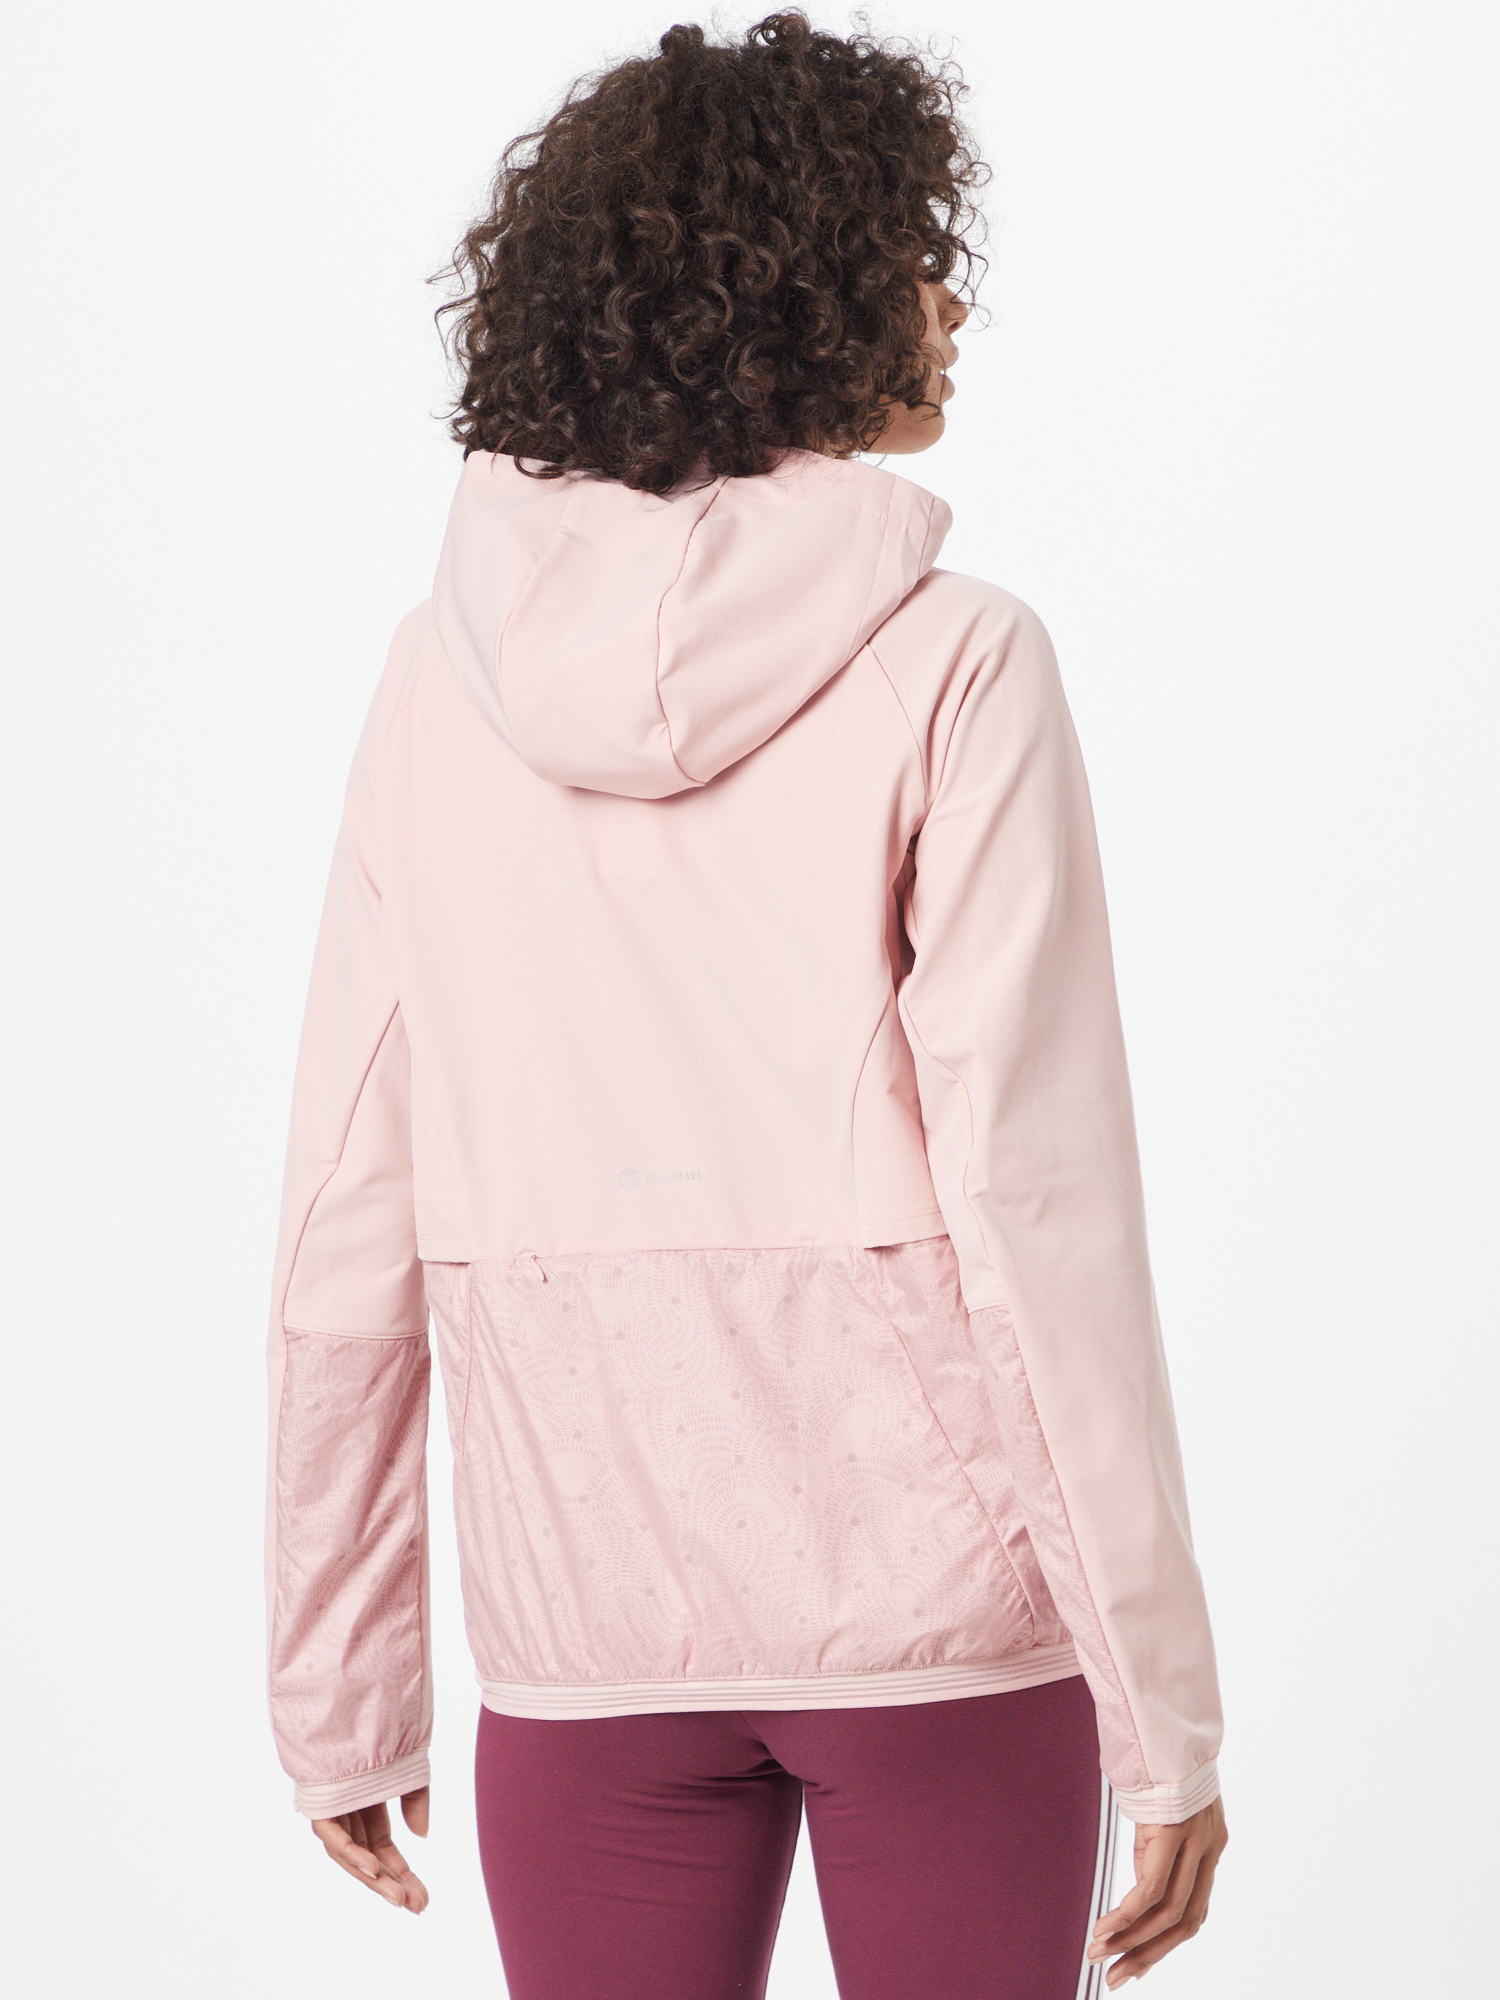 ADIDAS PERFORMANCE Sportjacke in Rosa 